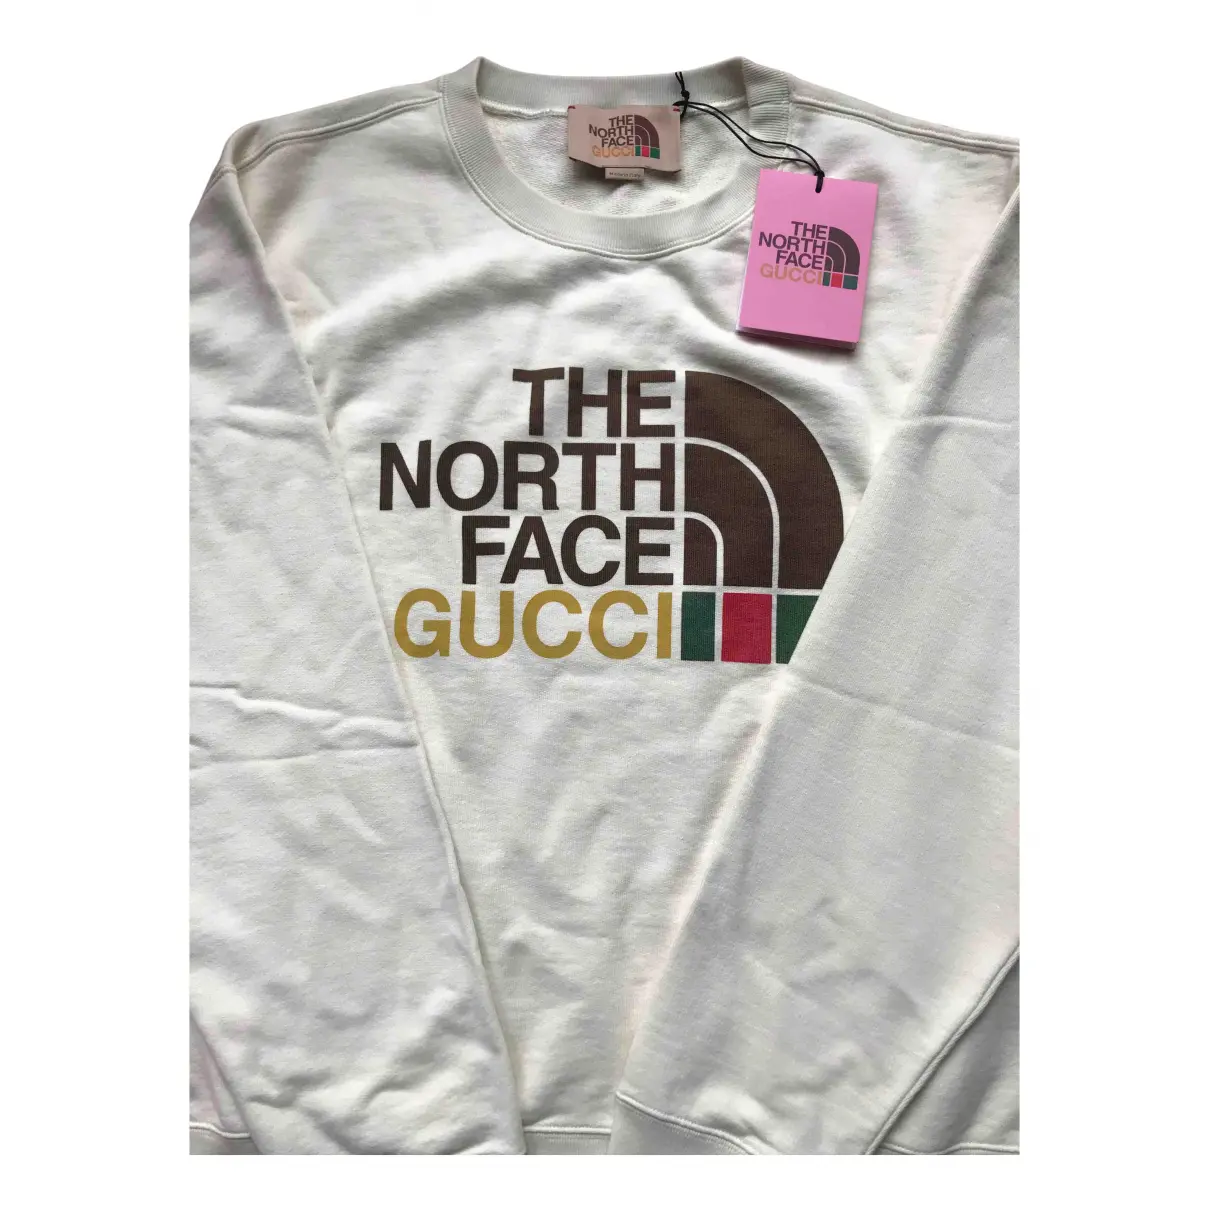 Knitwear The North Face x Gucci